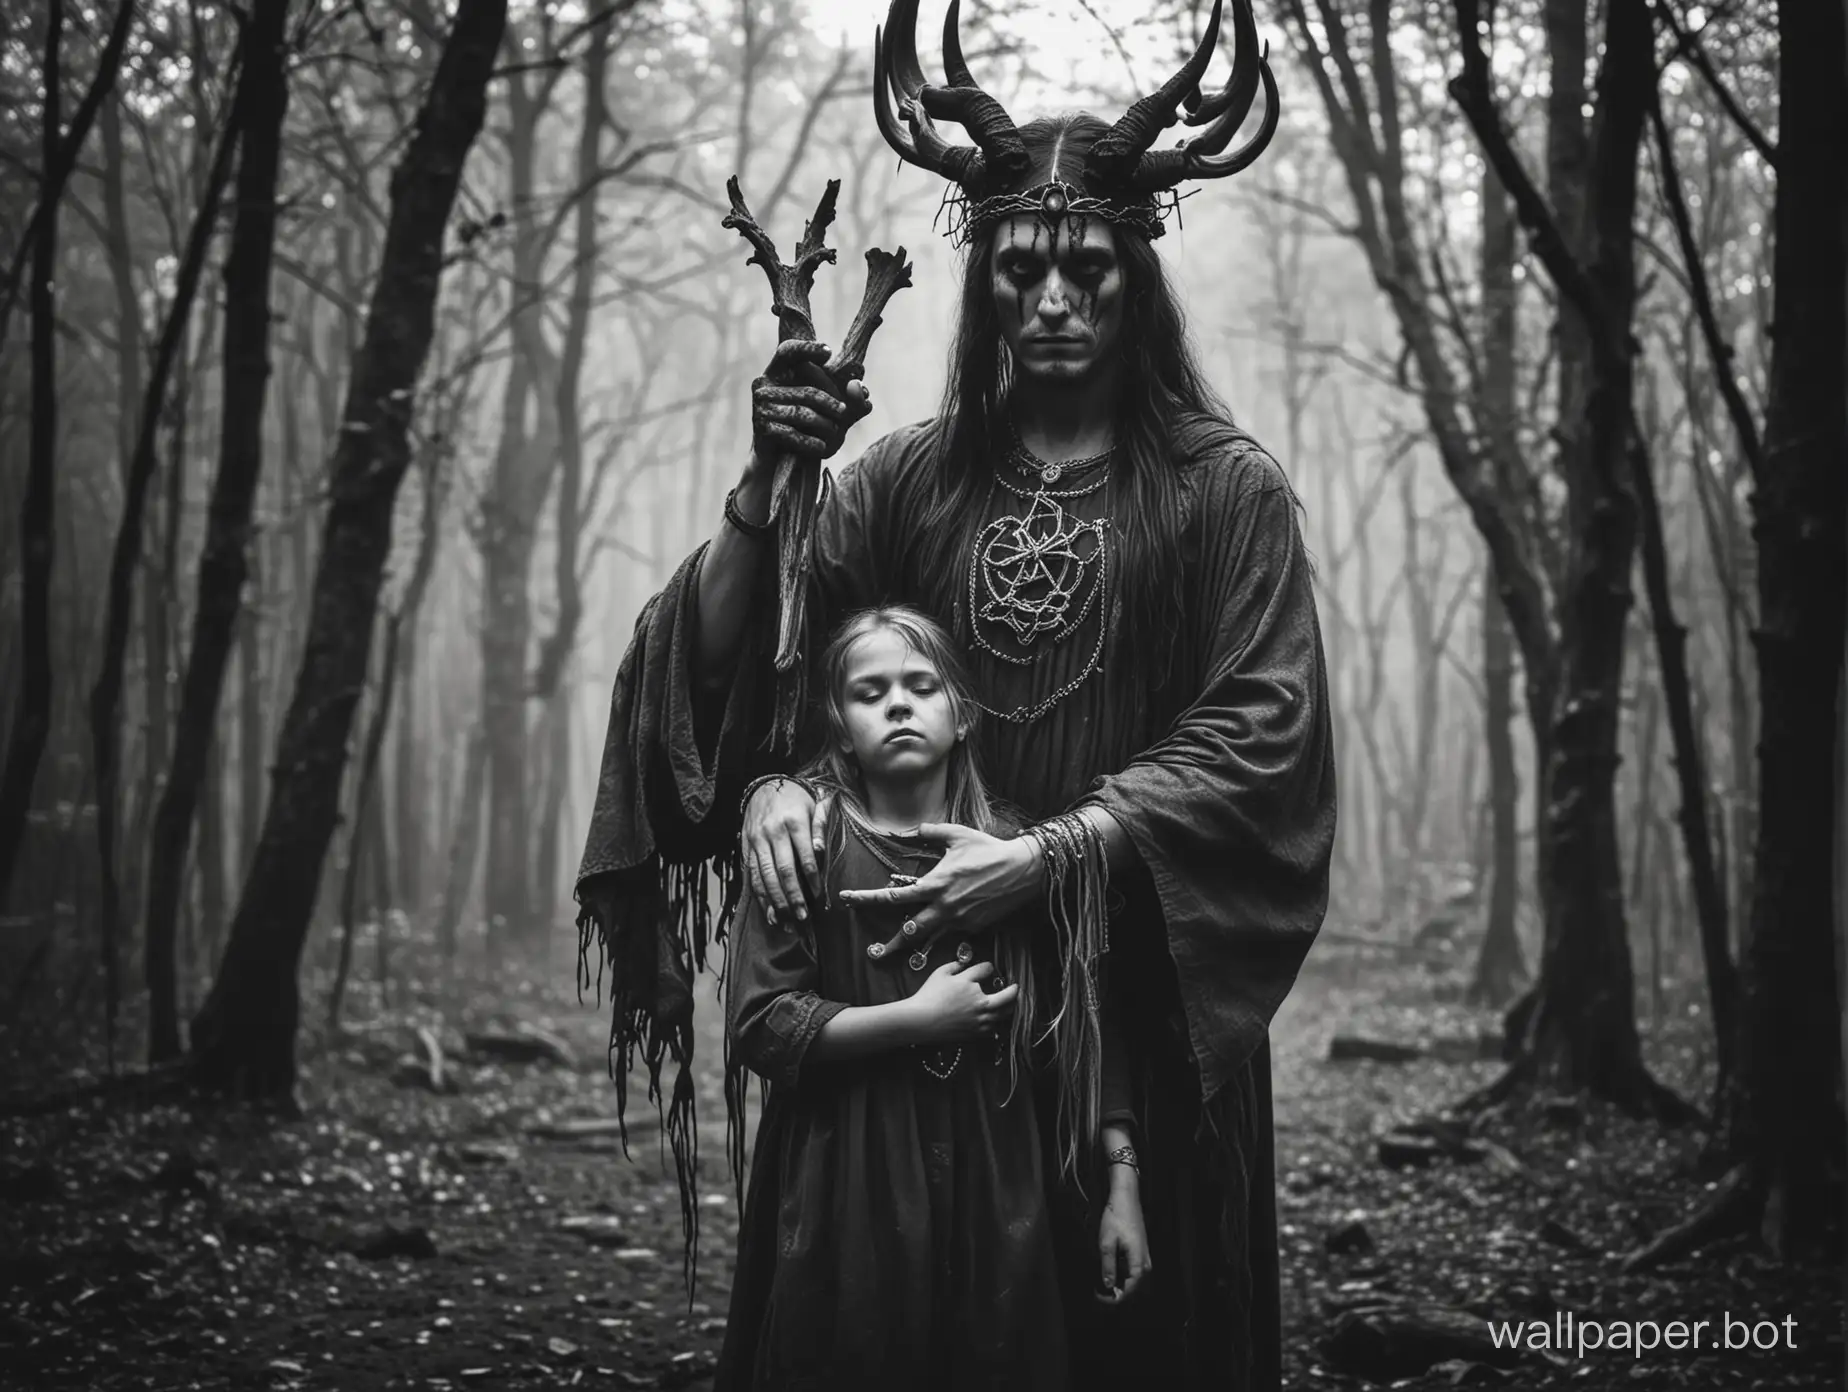 Druid-Performing-Satanic-Ritual-with-Girl-Sacrifice-in-High-Contrast-Black-and-White-Photography